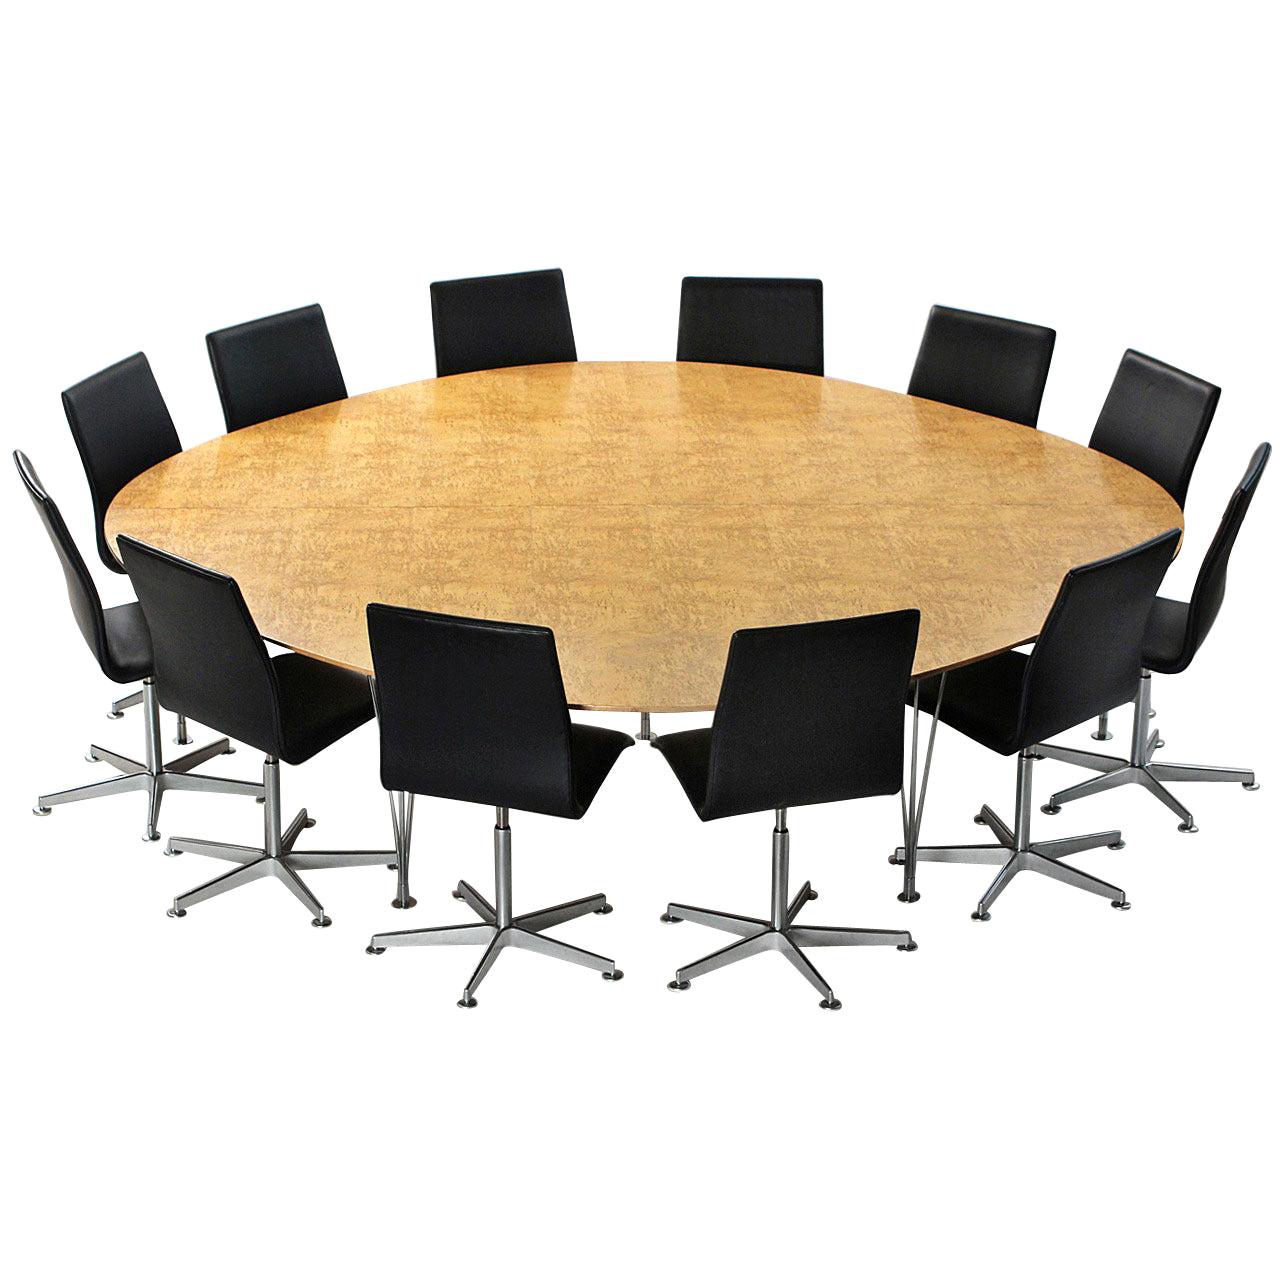 'Super Ellipse' Conference or Dining Table by Piet Hein